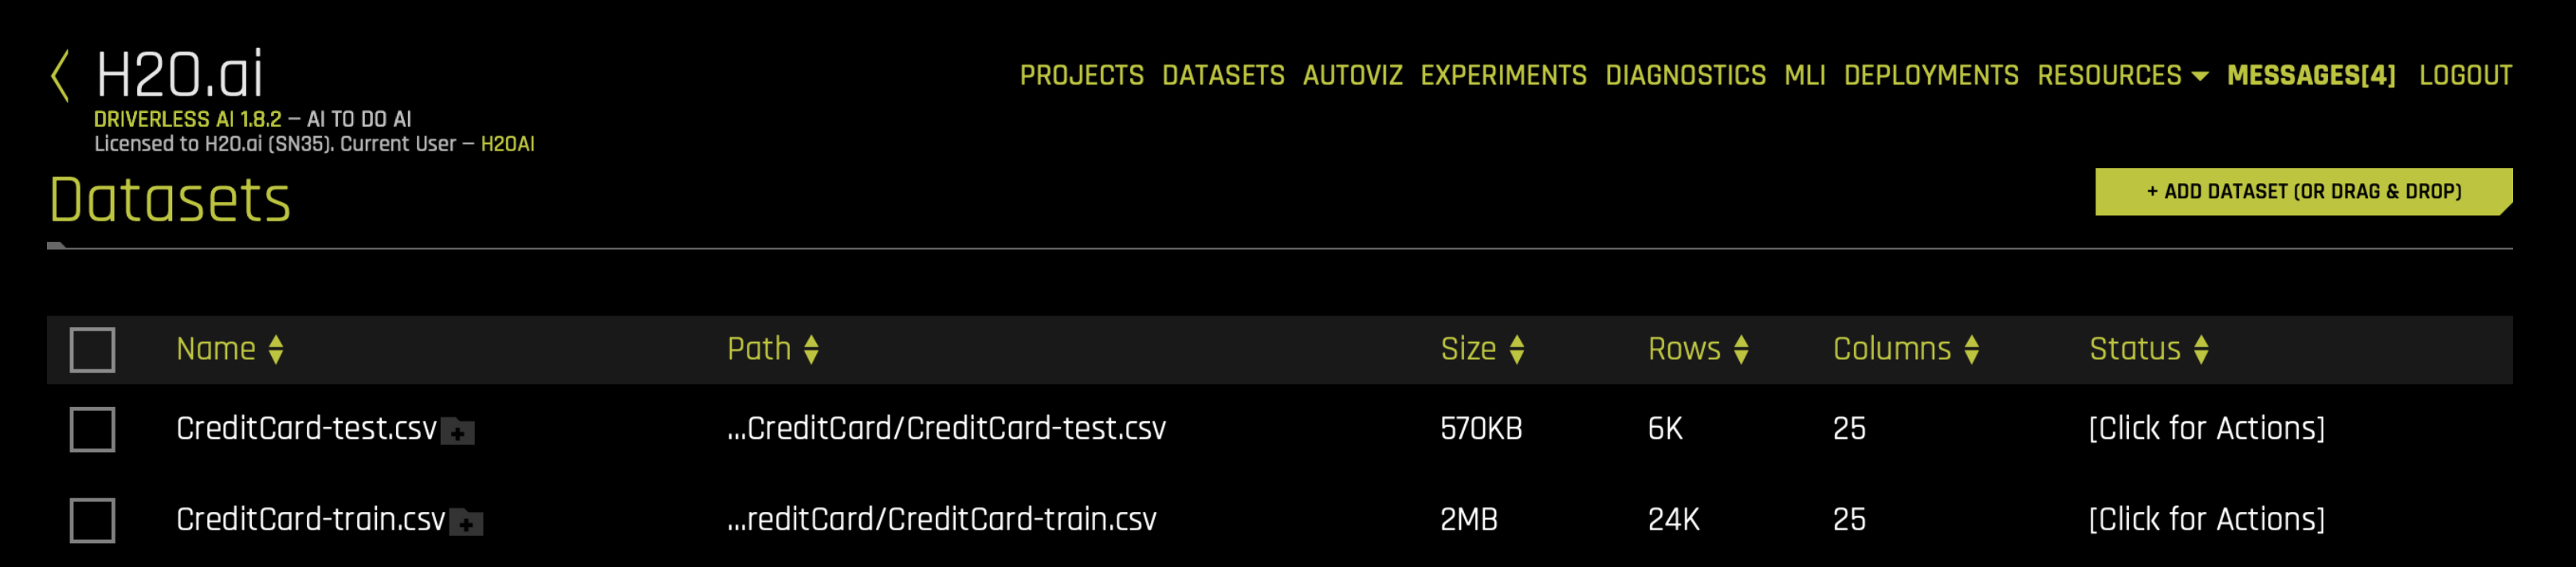 Equivalent Steps in Driverless: Upload Train & Test CSV Files